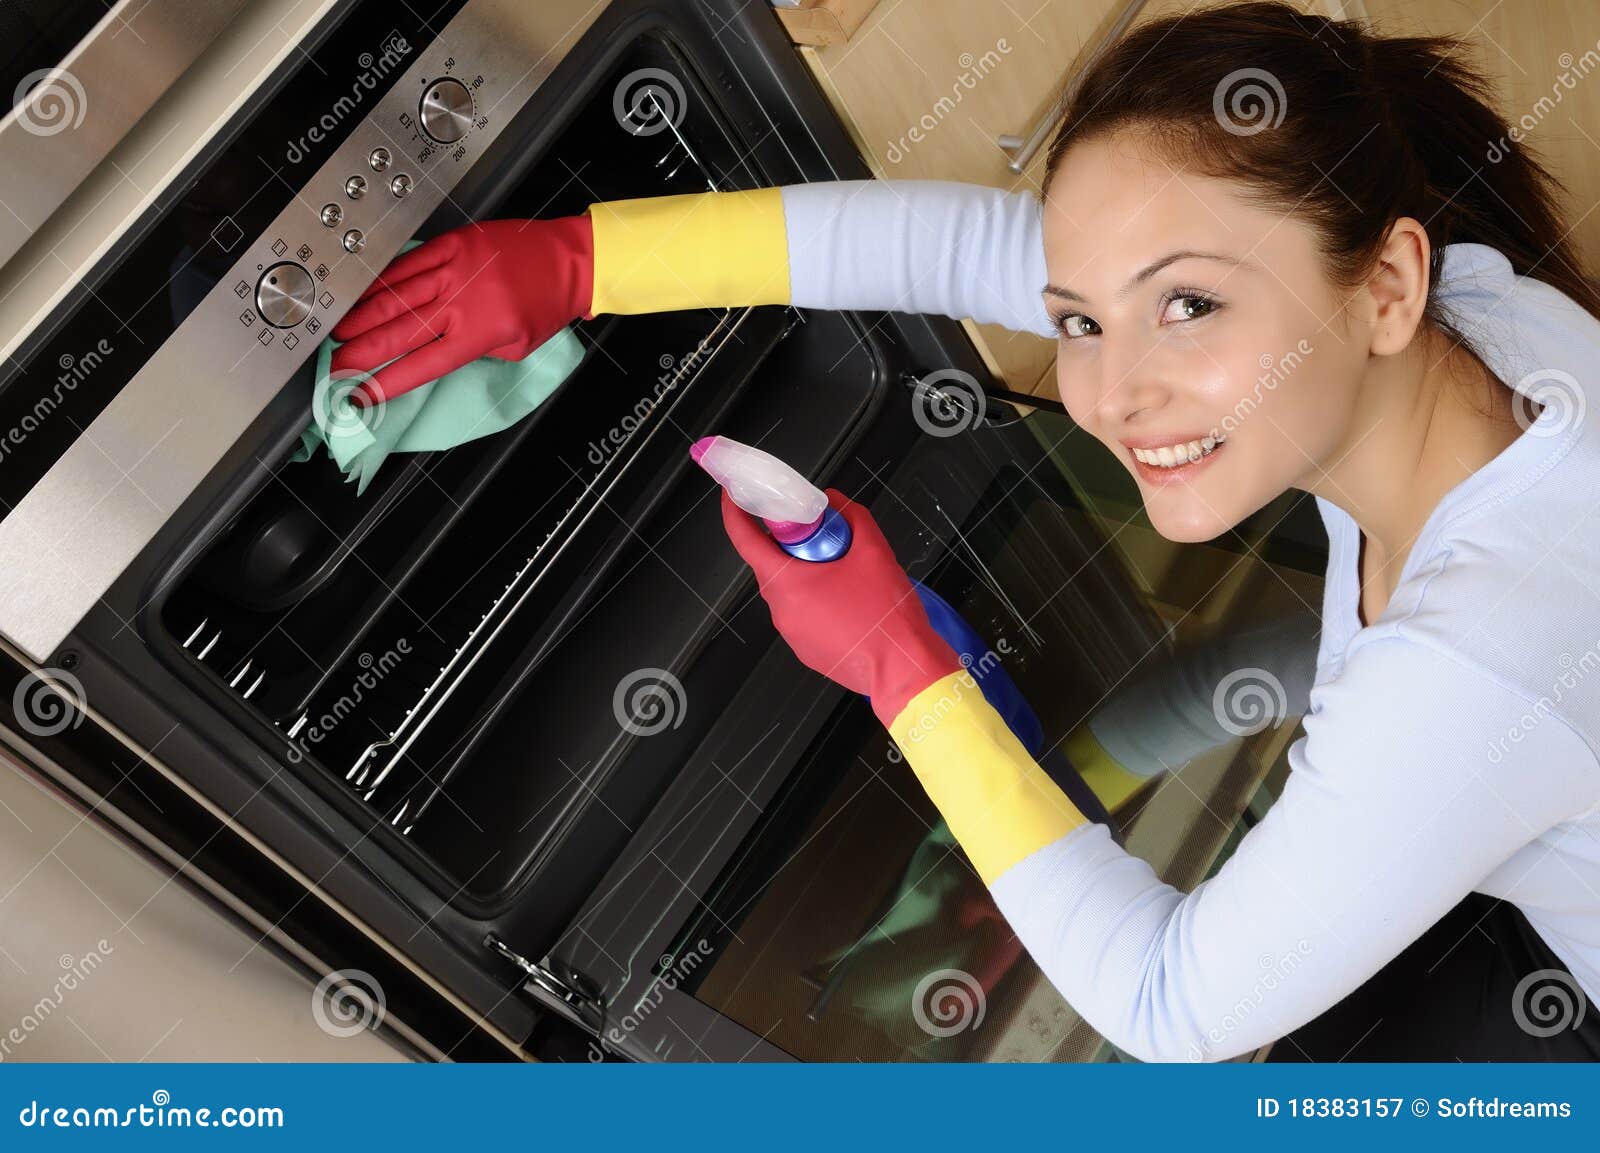 girl cleaning the house